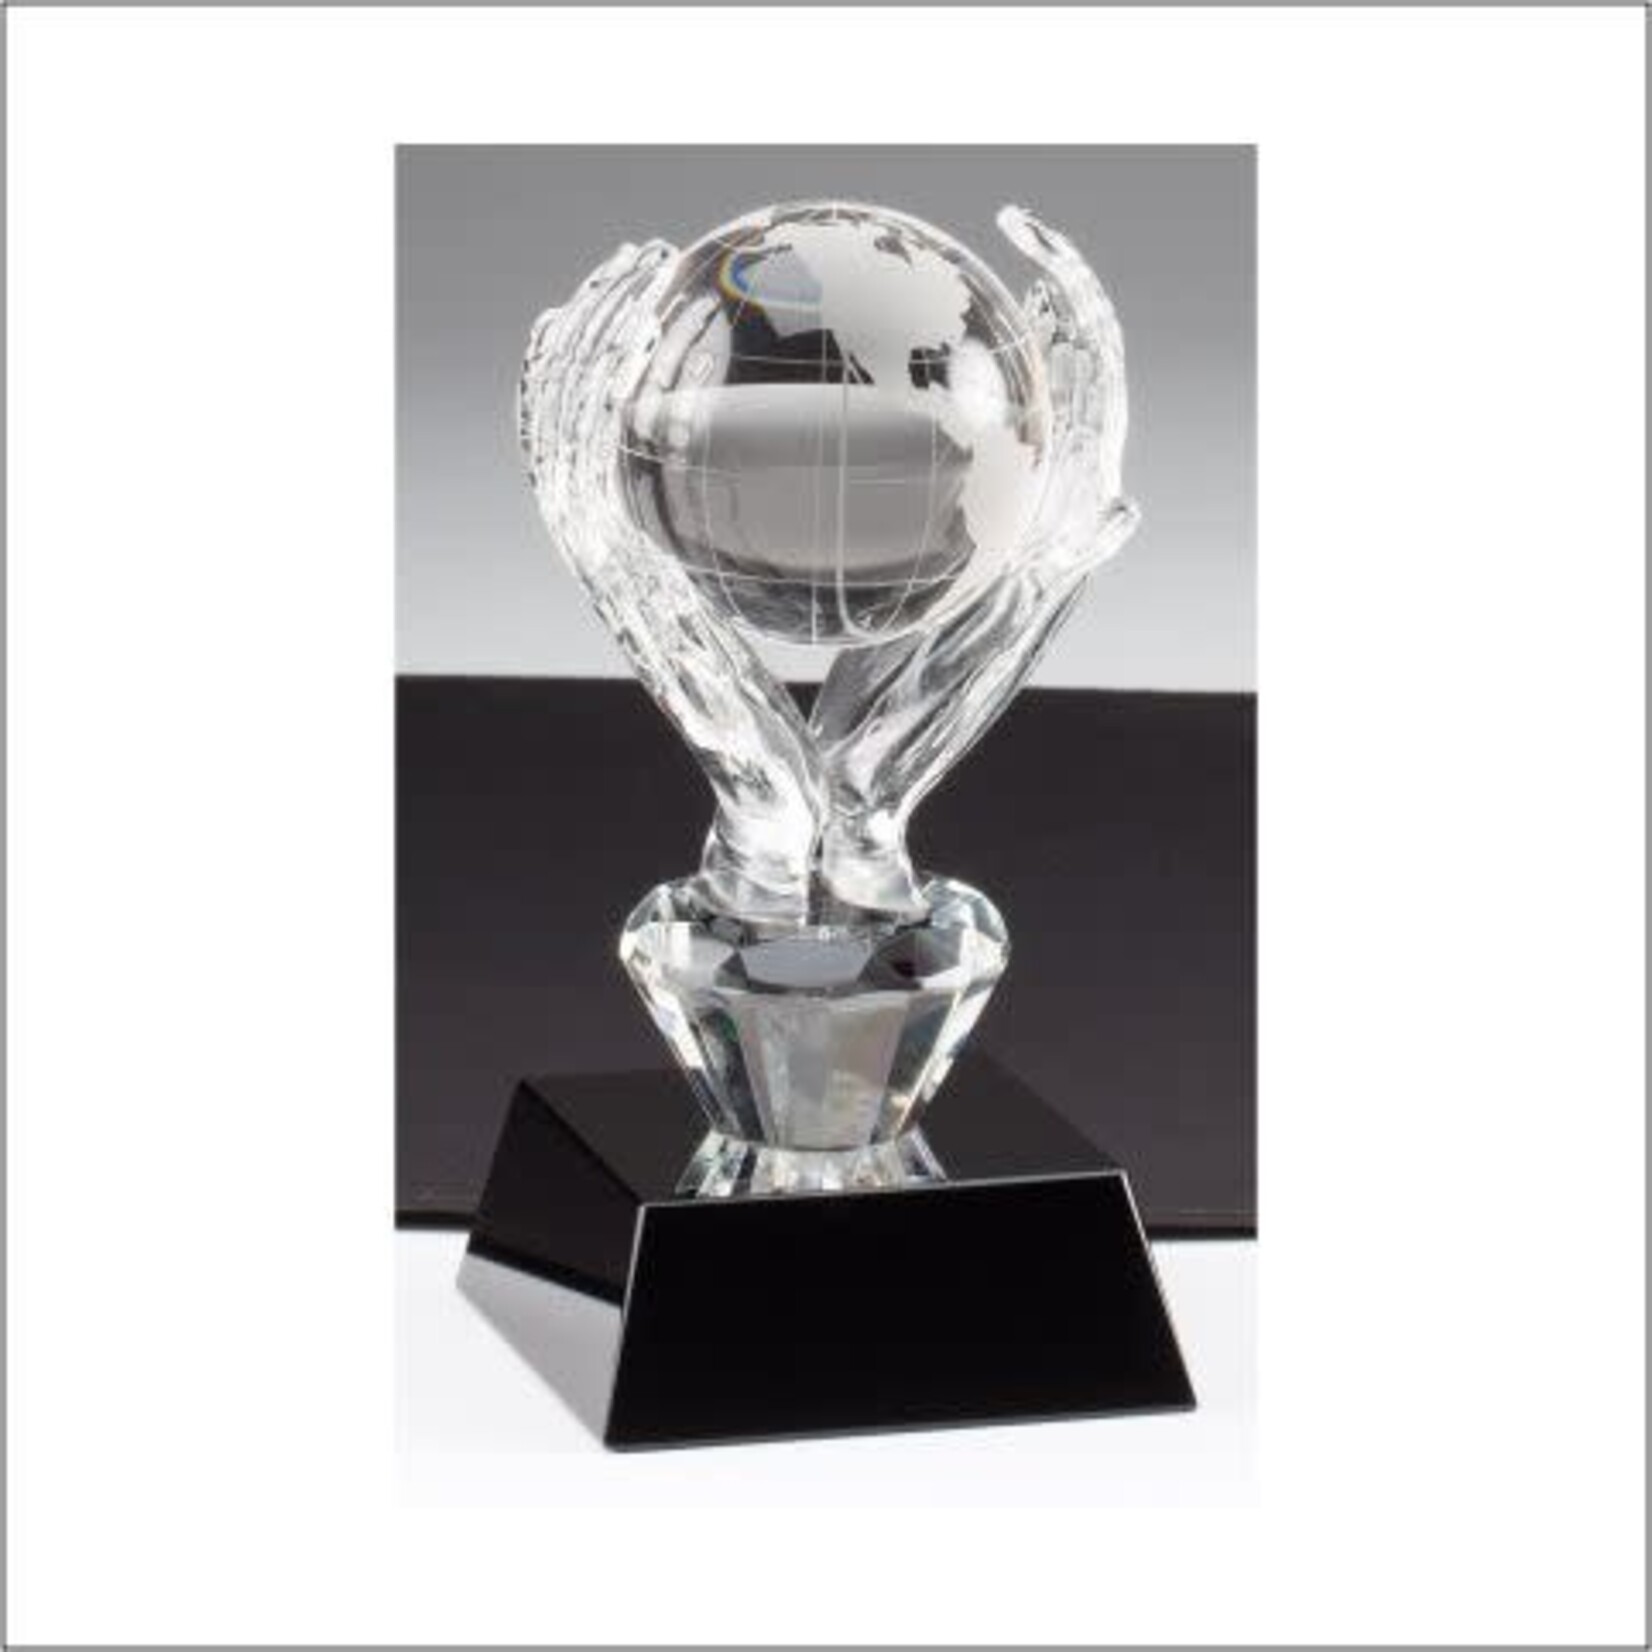 Marco CRY428 Crystal Globe with hands